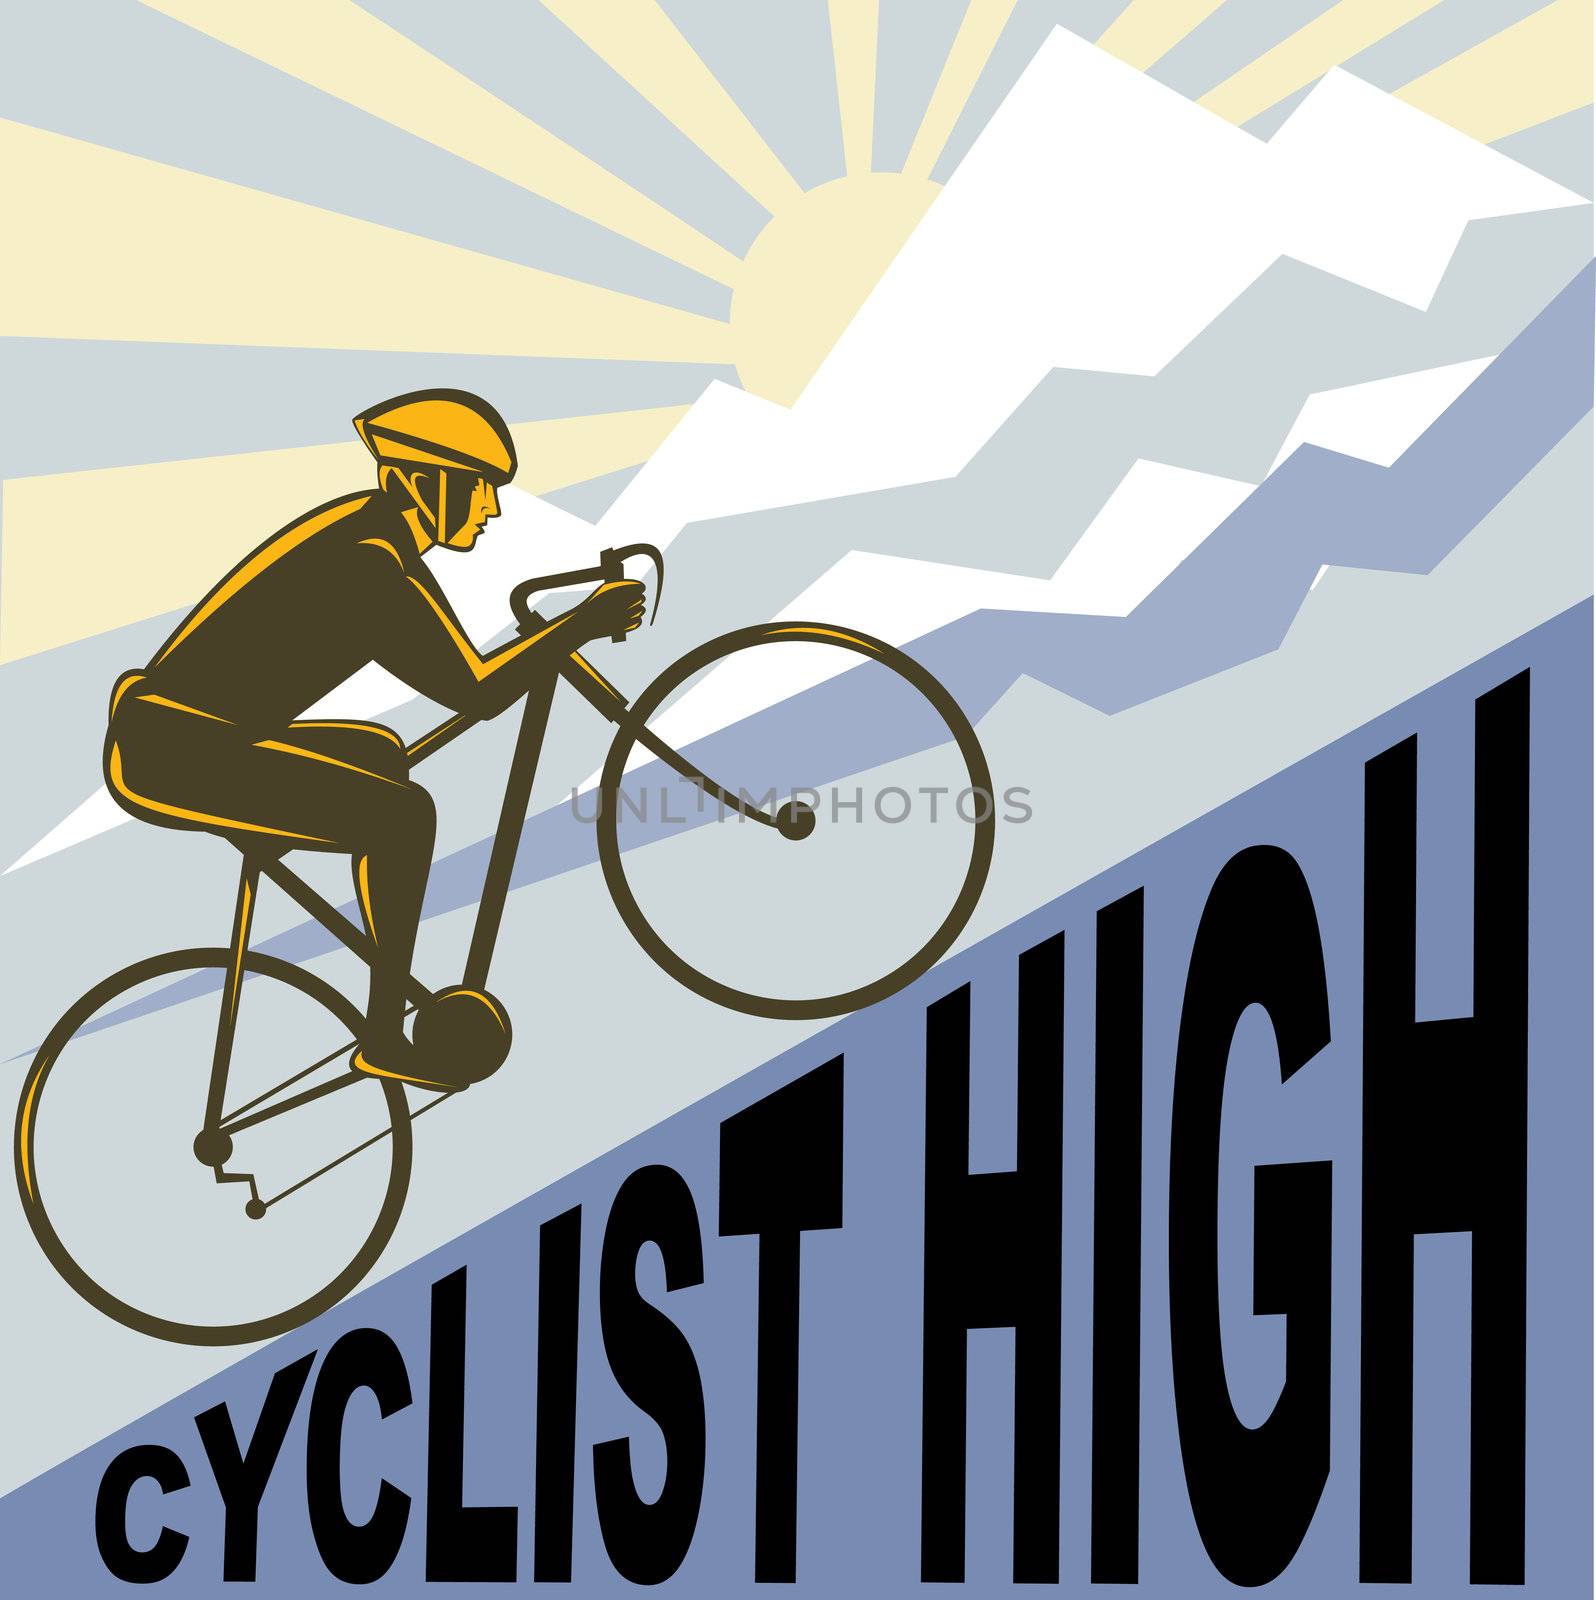 graphic design illustration of a Cyclist racing bike up steep mountain and clouds sunburst done in retro WPA style.